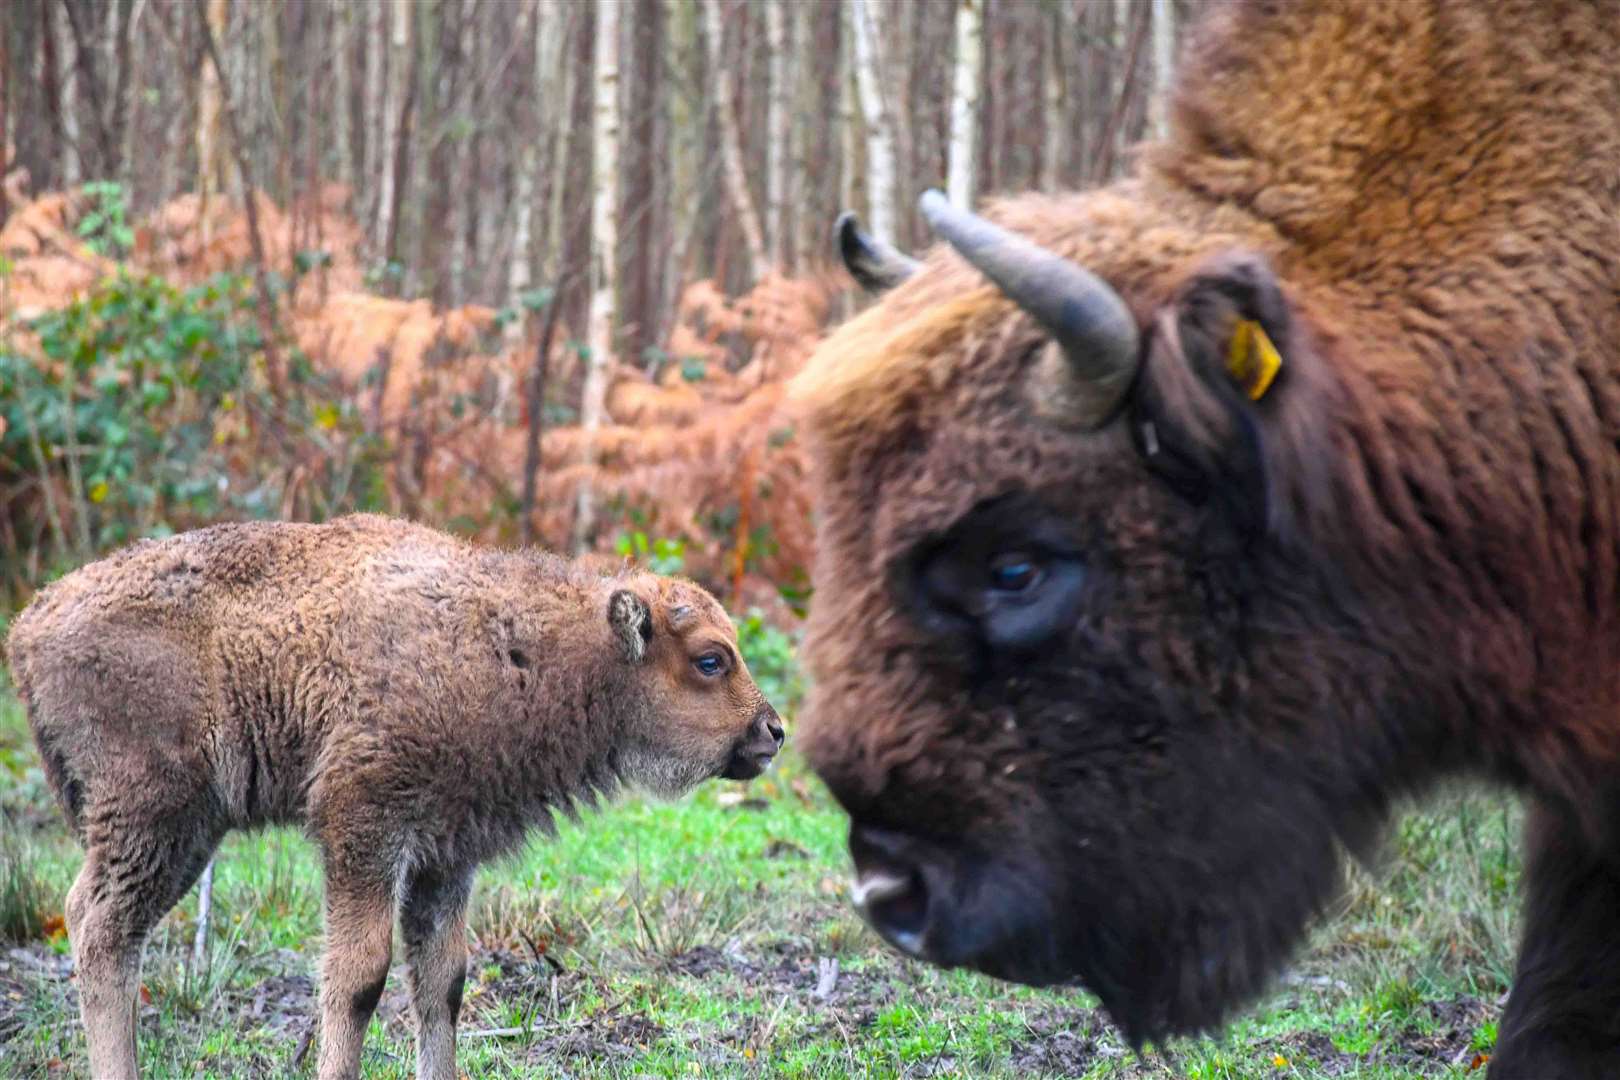 The bison calf, pictured with his father, was born in November. Picture: Tim Horton for Kent Wildlife Trust